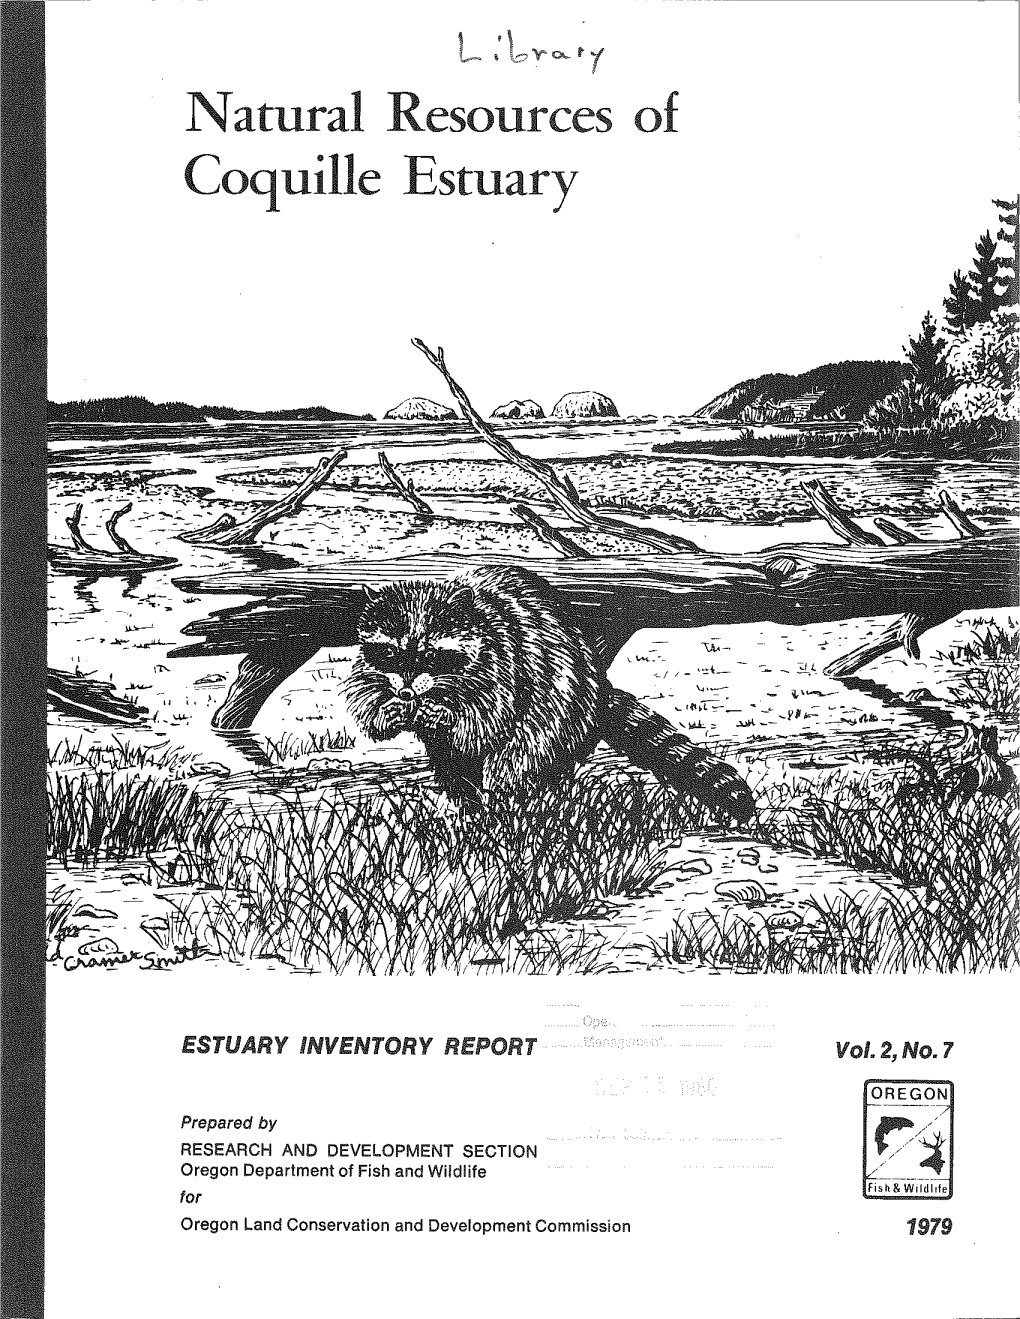 Natural Resources of Coquille Estuary